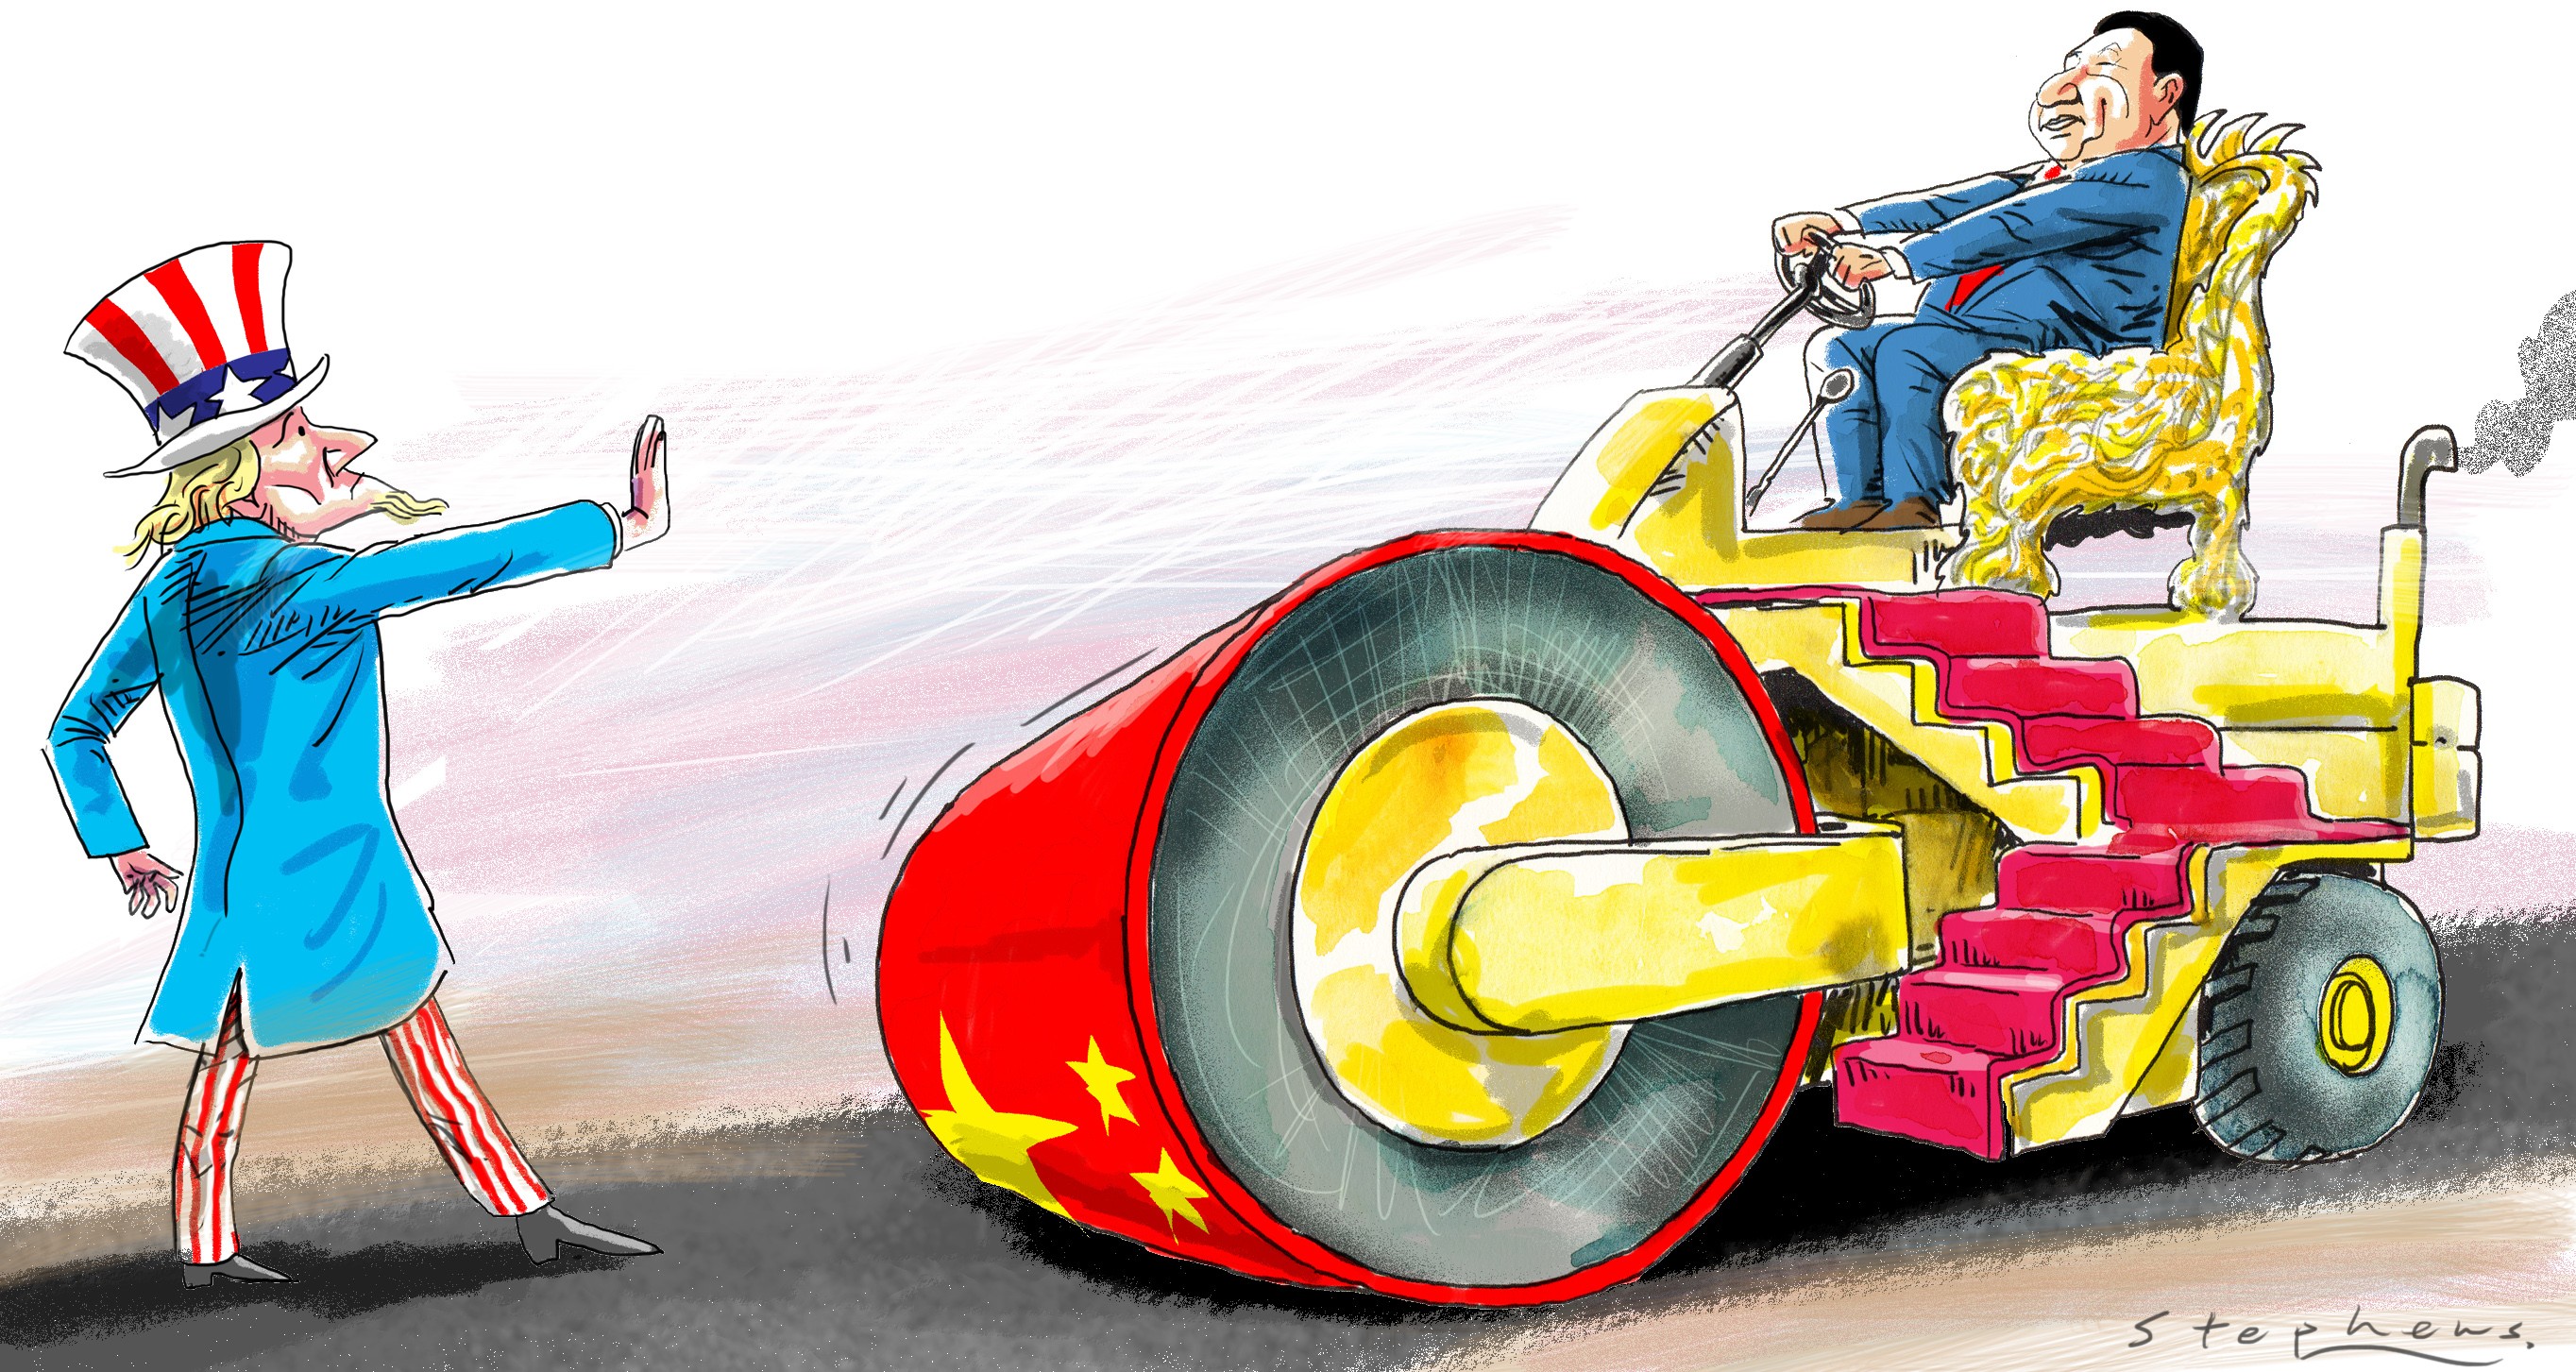 For the US, Xi Jinping’s consolidation of power will make China an even more formidable competitor both within East Asia and globally. Illustration: Craig Stephens